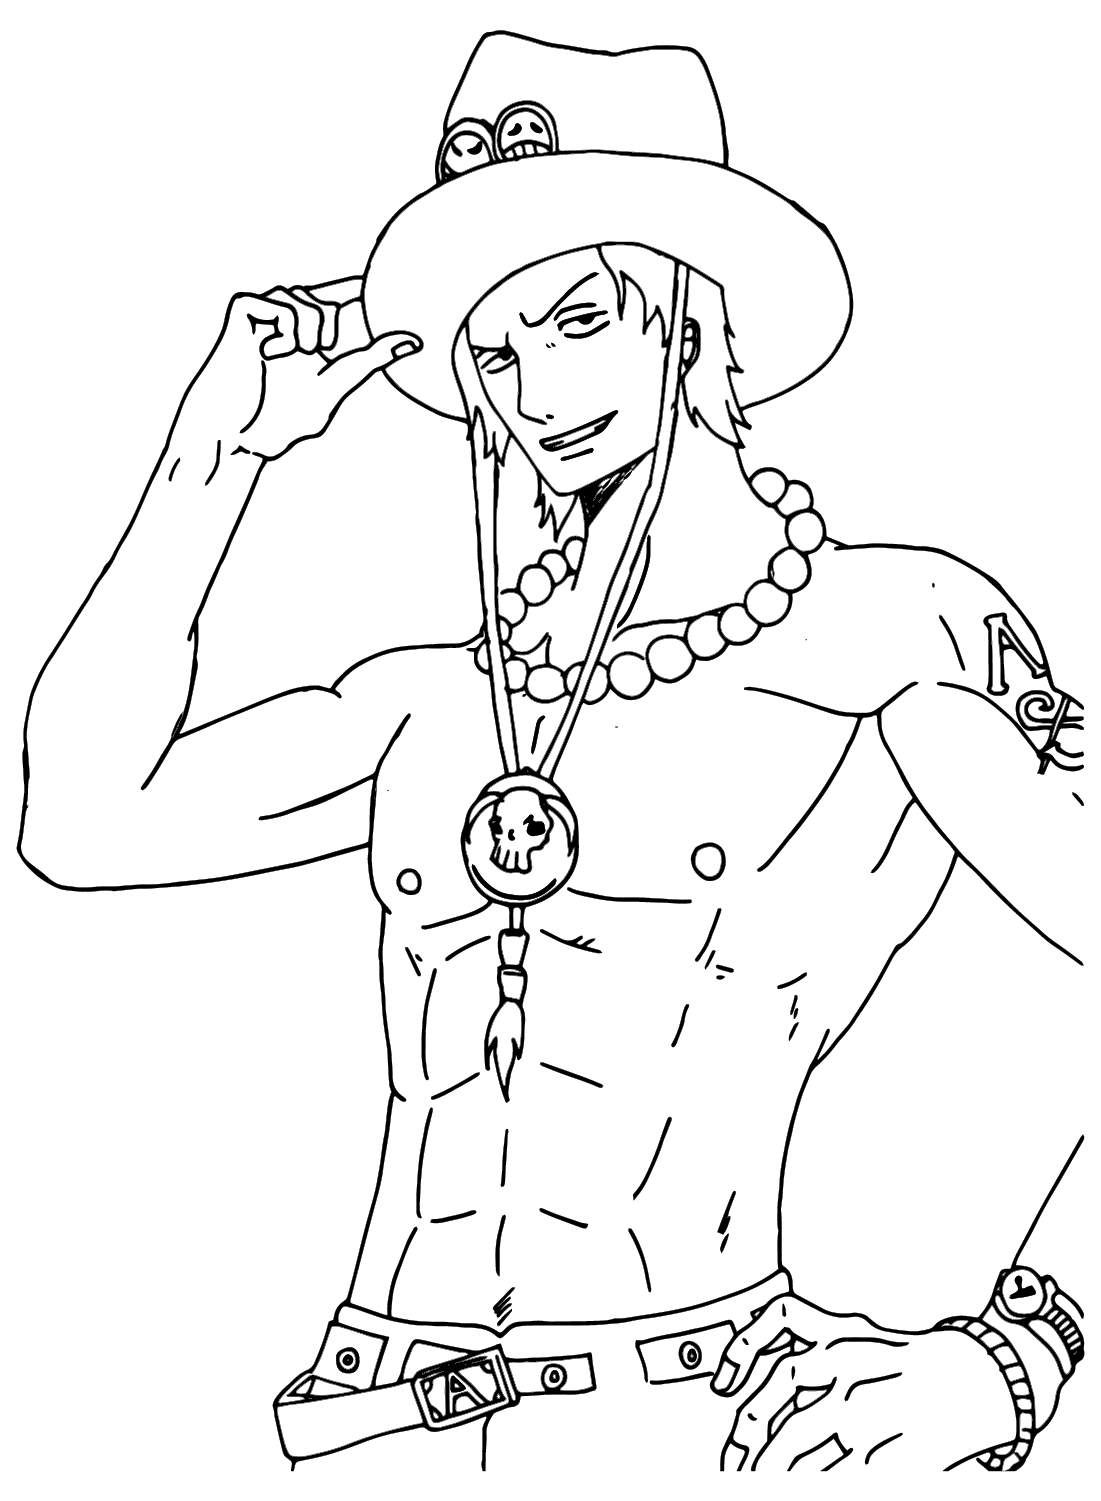 Portgas D. Ace Coloring Pages to Download from Portgas D. Ace